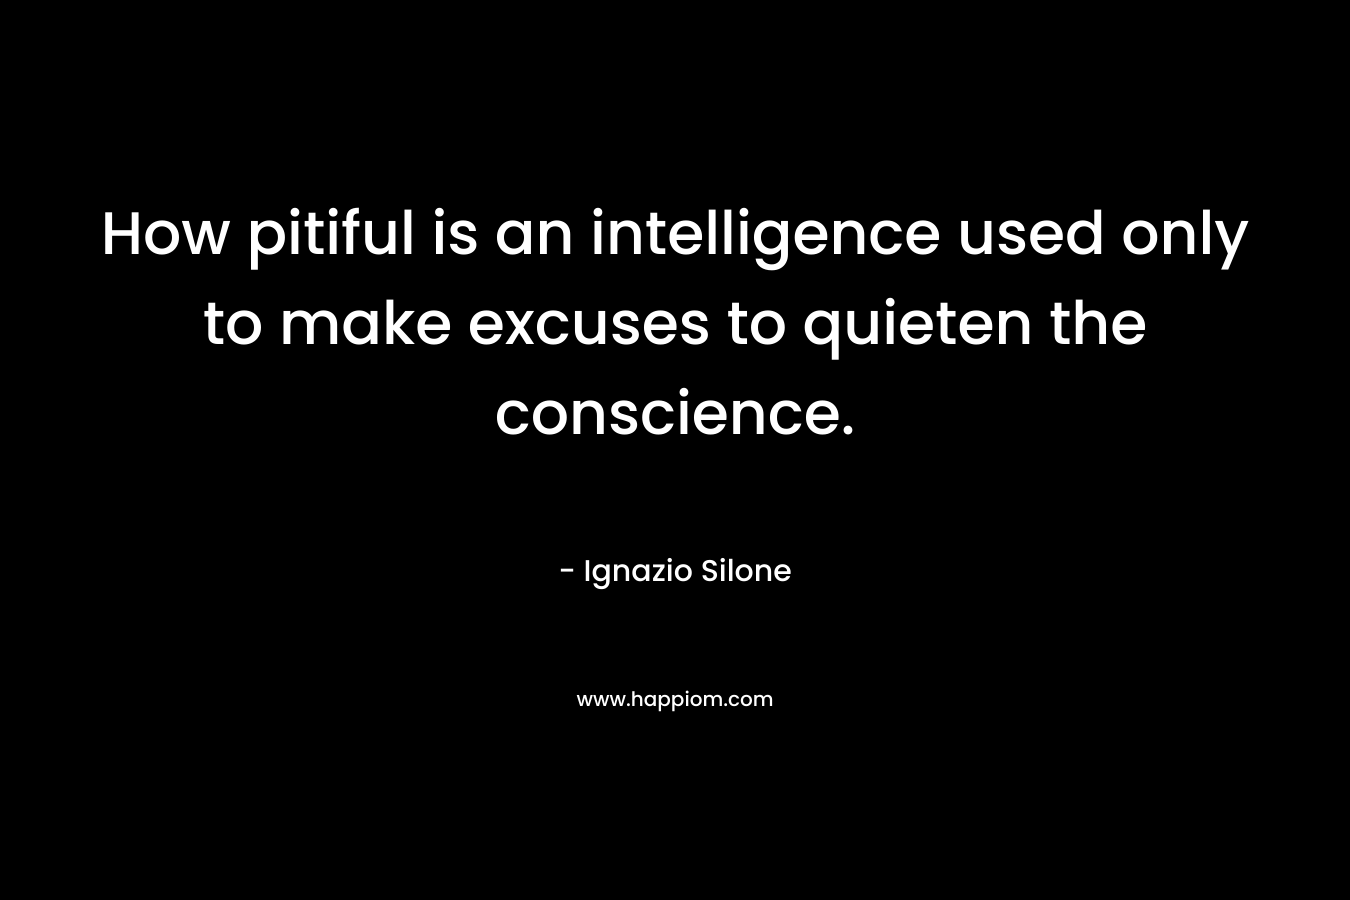 How pitiful is an intelligence used only to make excuses to quieten the conscience.